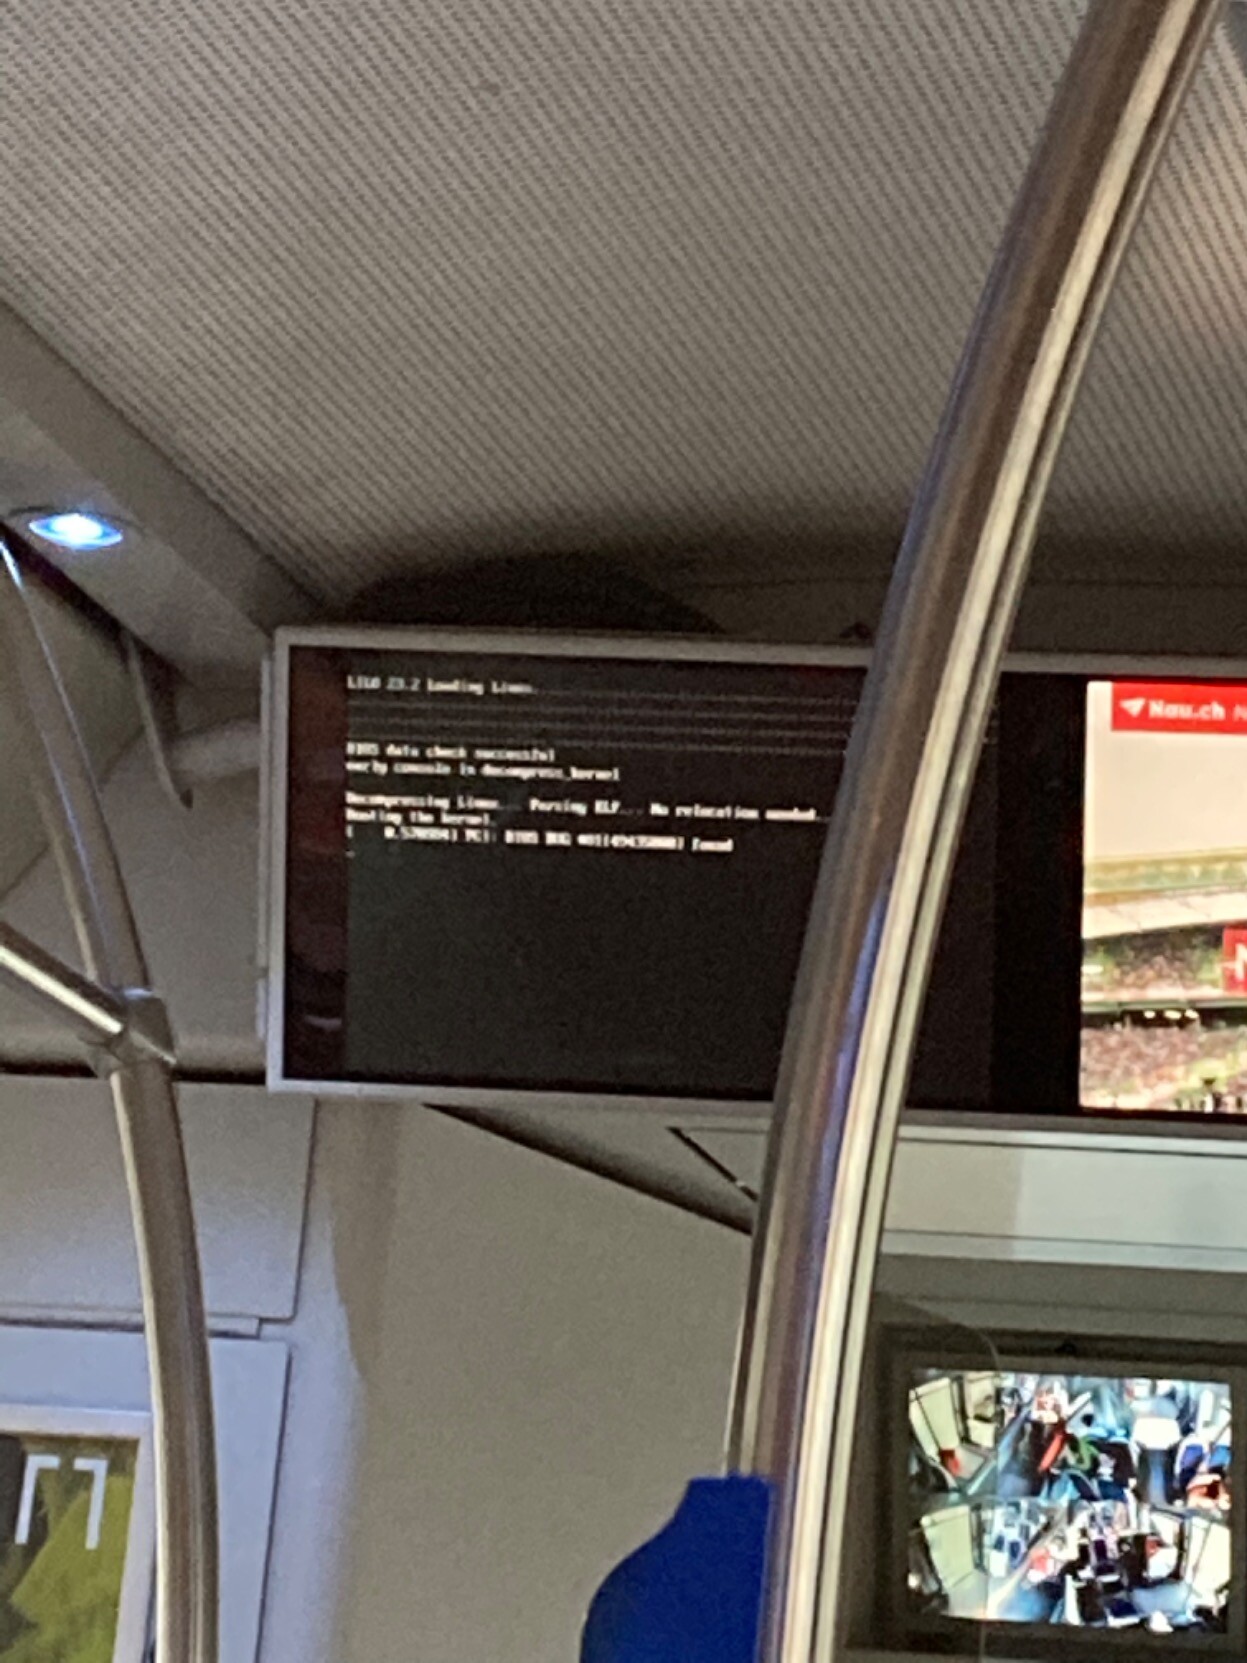 Blurry picture of a bus screen rebooting, showing LILO as the bootloader.